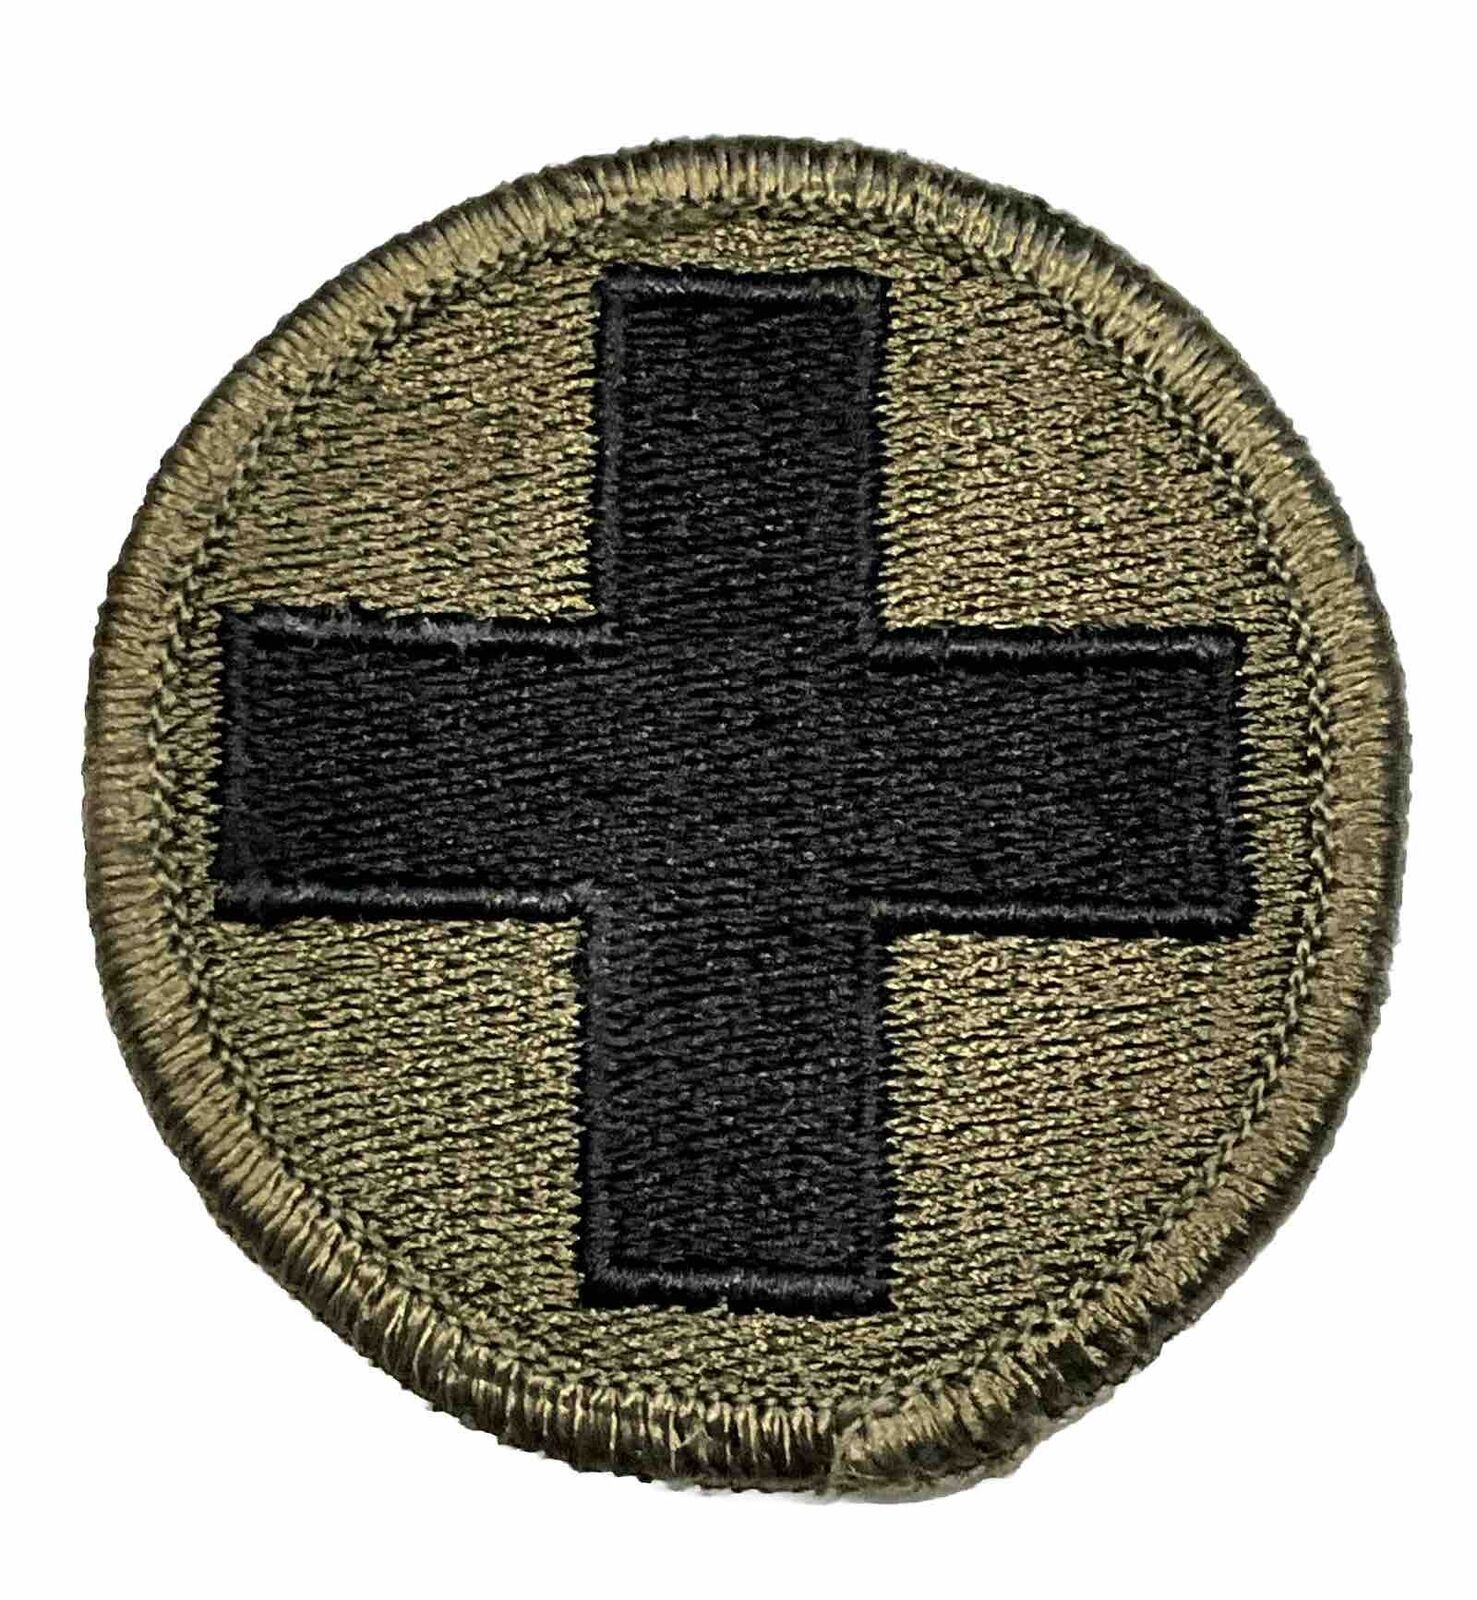 Vietnam Era U.S. Army 33rd Infantry Division Subdued Merrowed Edges Patch